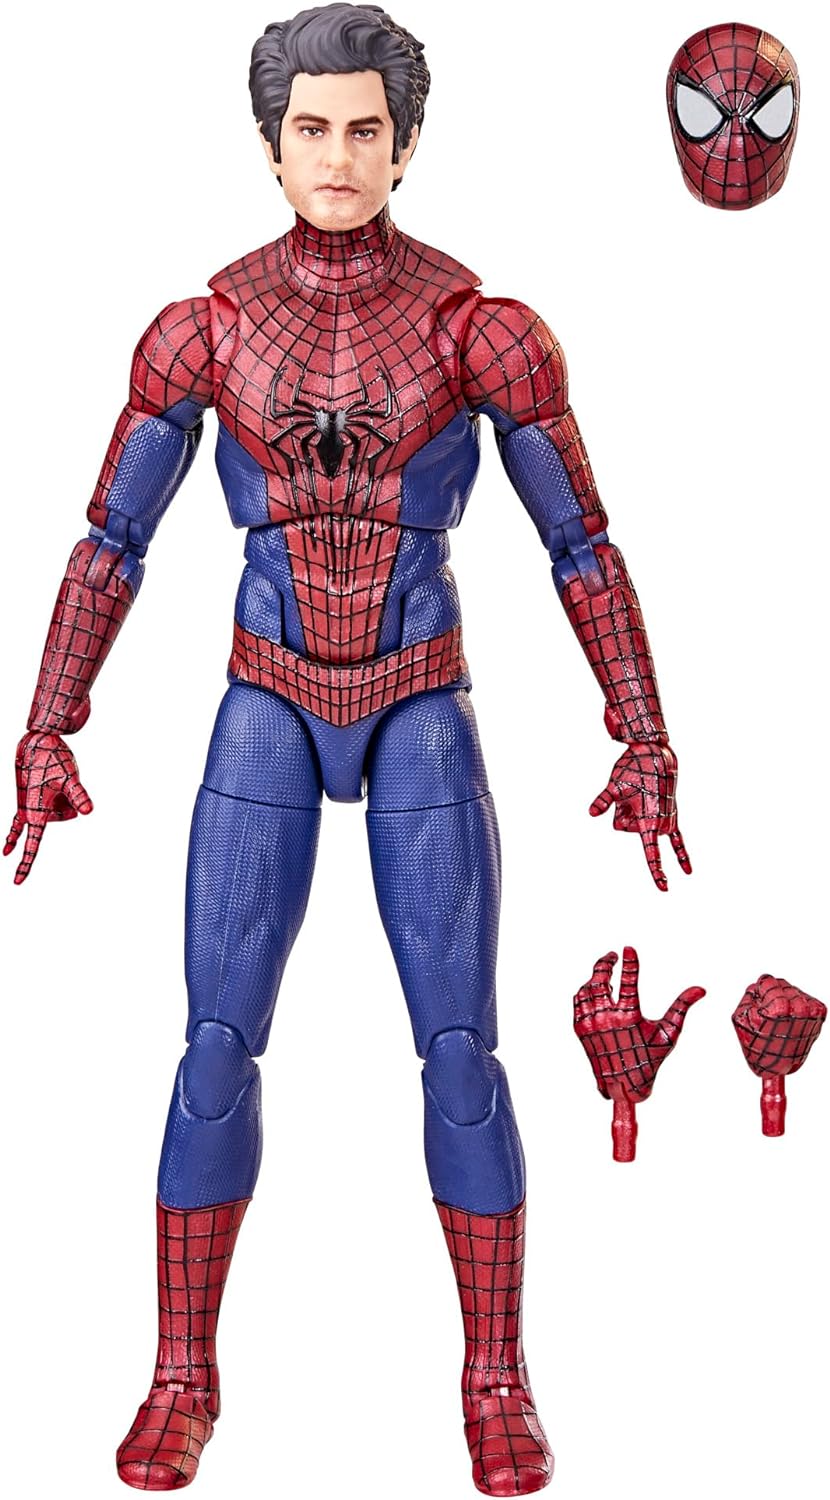 Marvel Legends the Amazing Spider-Man 2 The Amazing Spider-Man 6-Inch Action Figure画像